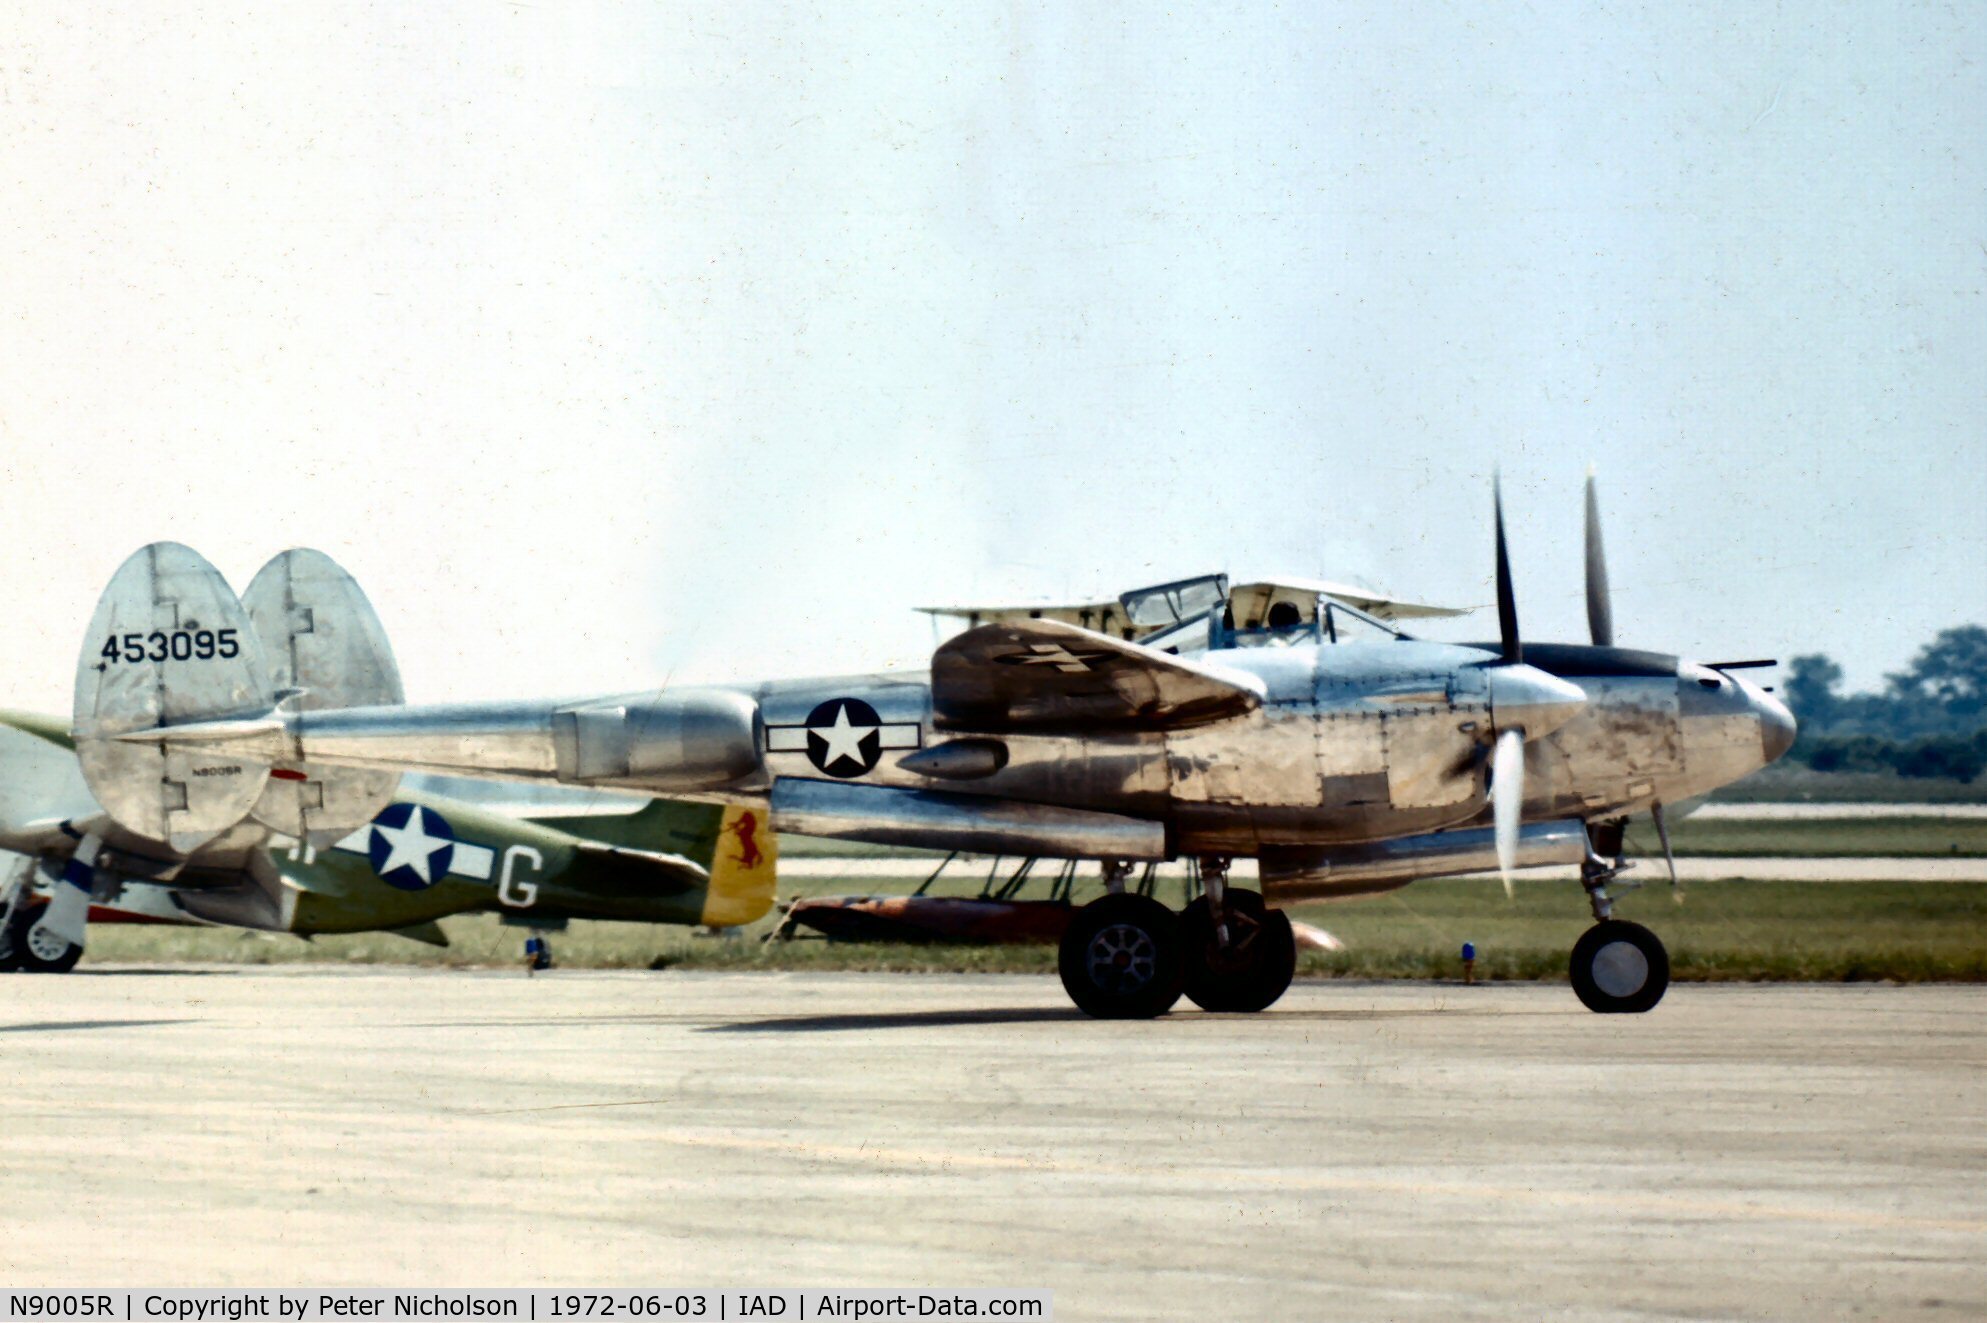 N9005R, 1944 Lockheed P-38M C/N 44-53095, Flown by the Confederate Air Force at Transpo 72 held at Dulles Airport and shows the plain side of the nose of the 